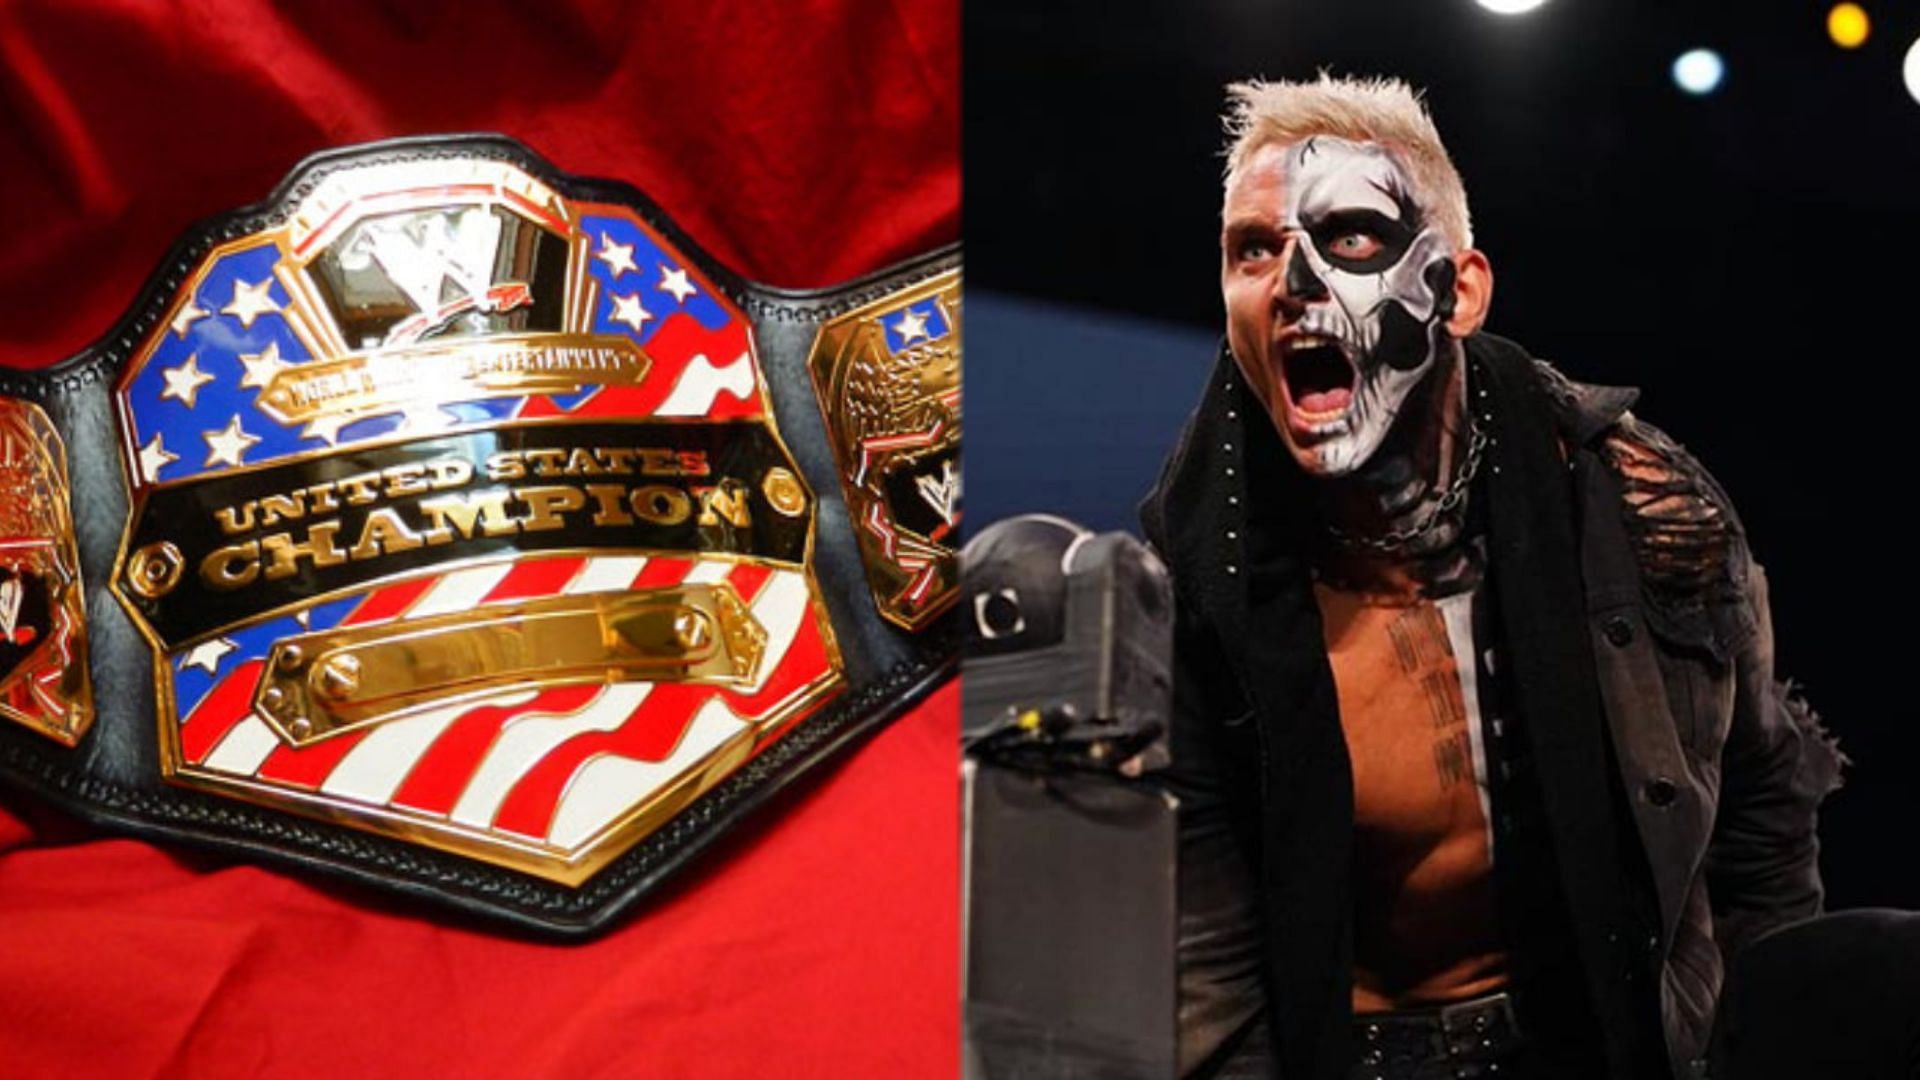 Could Darby Allin entice this star to return to AEW to make a statement?